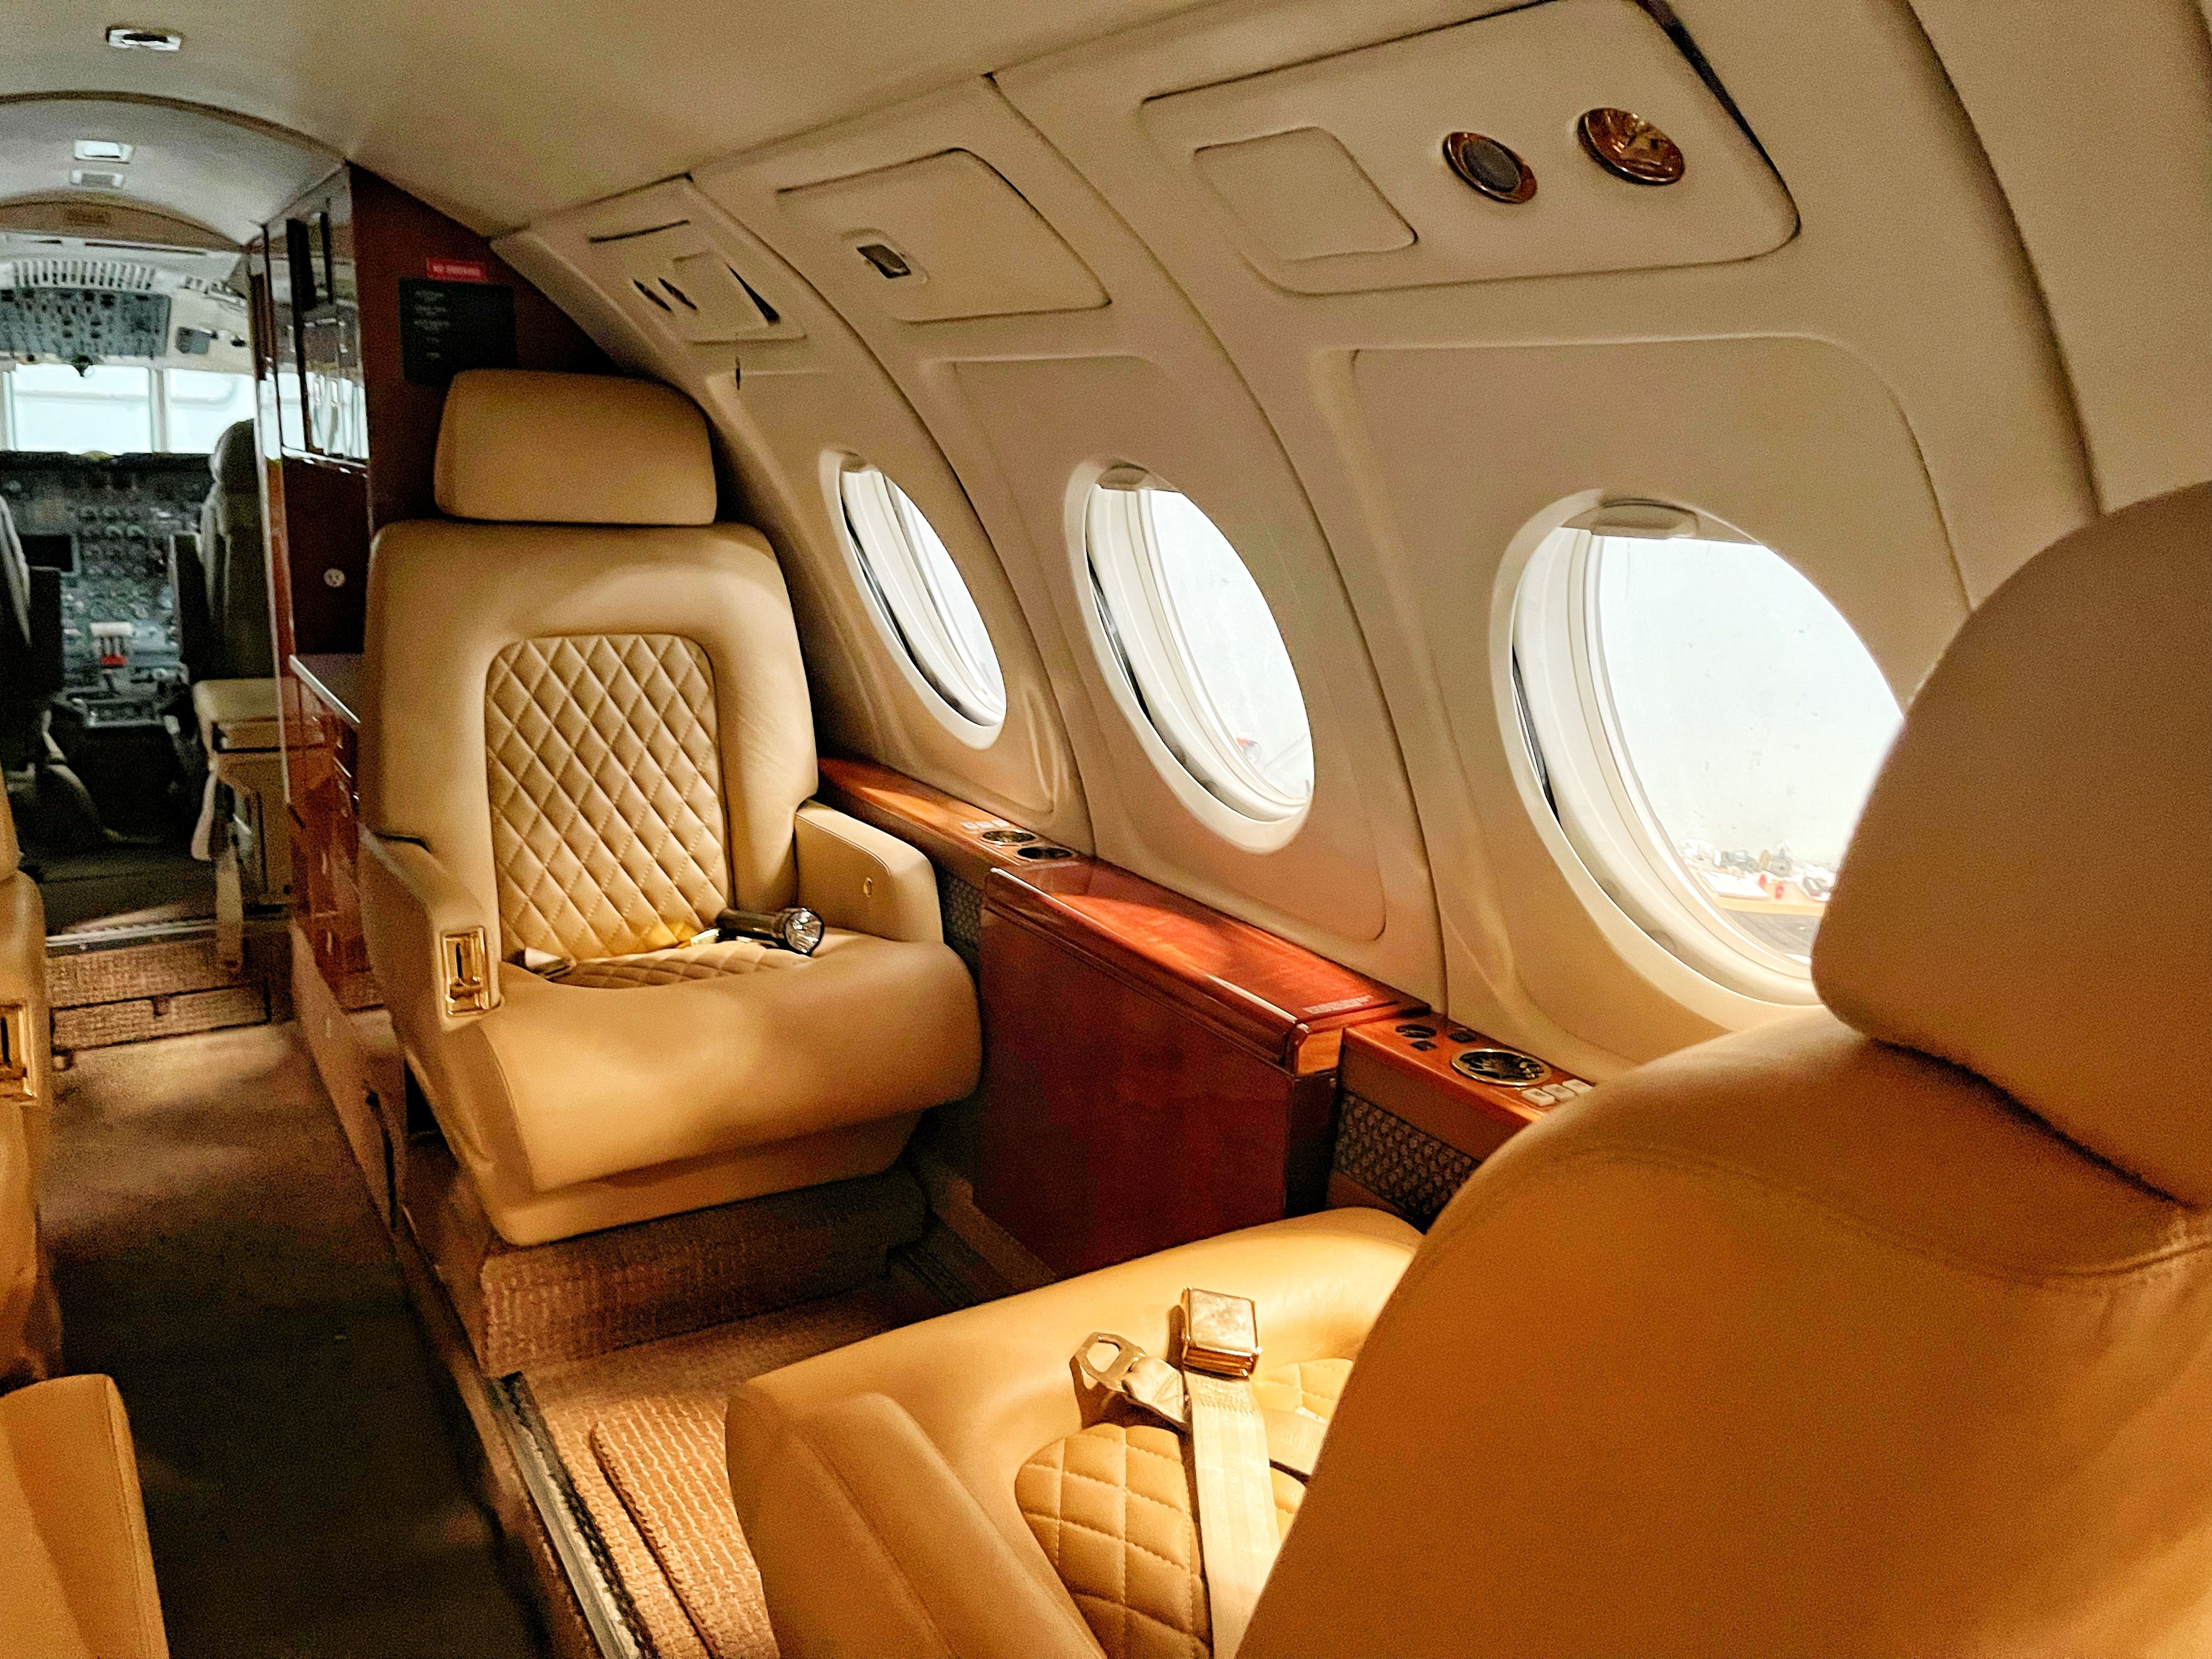 A luxury private jet